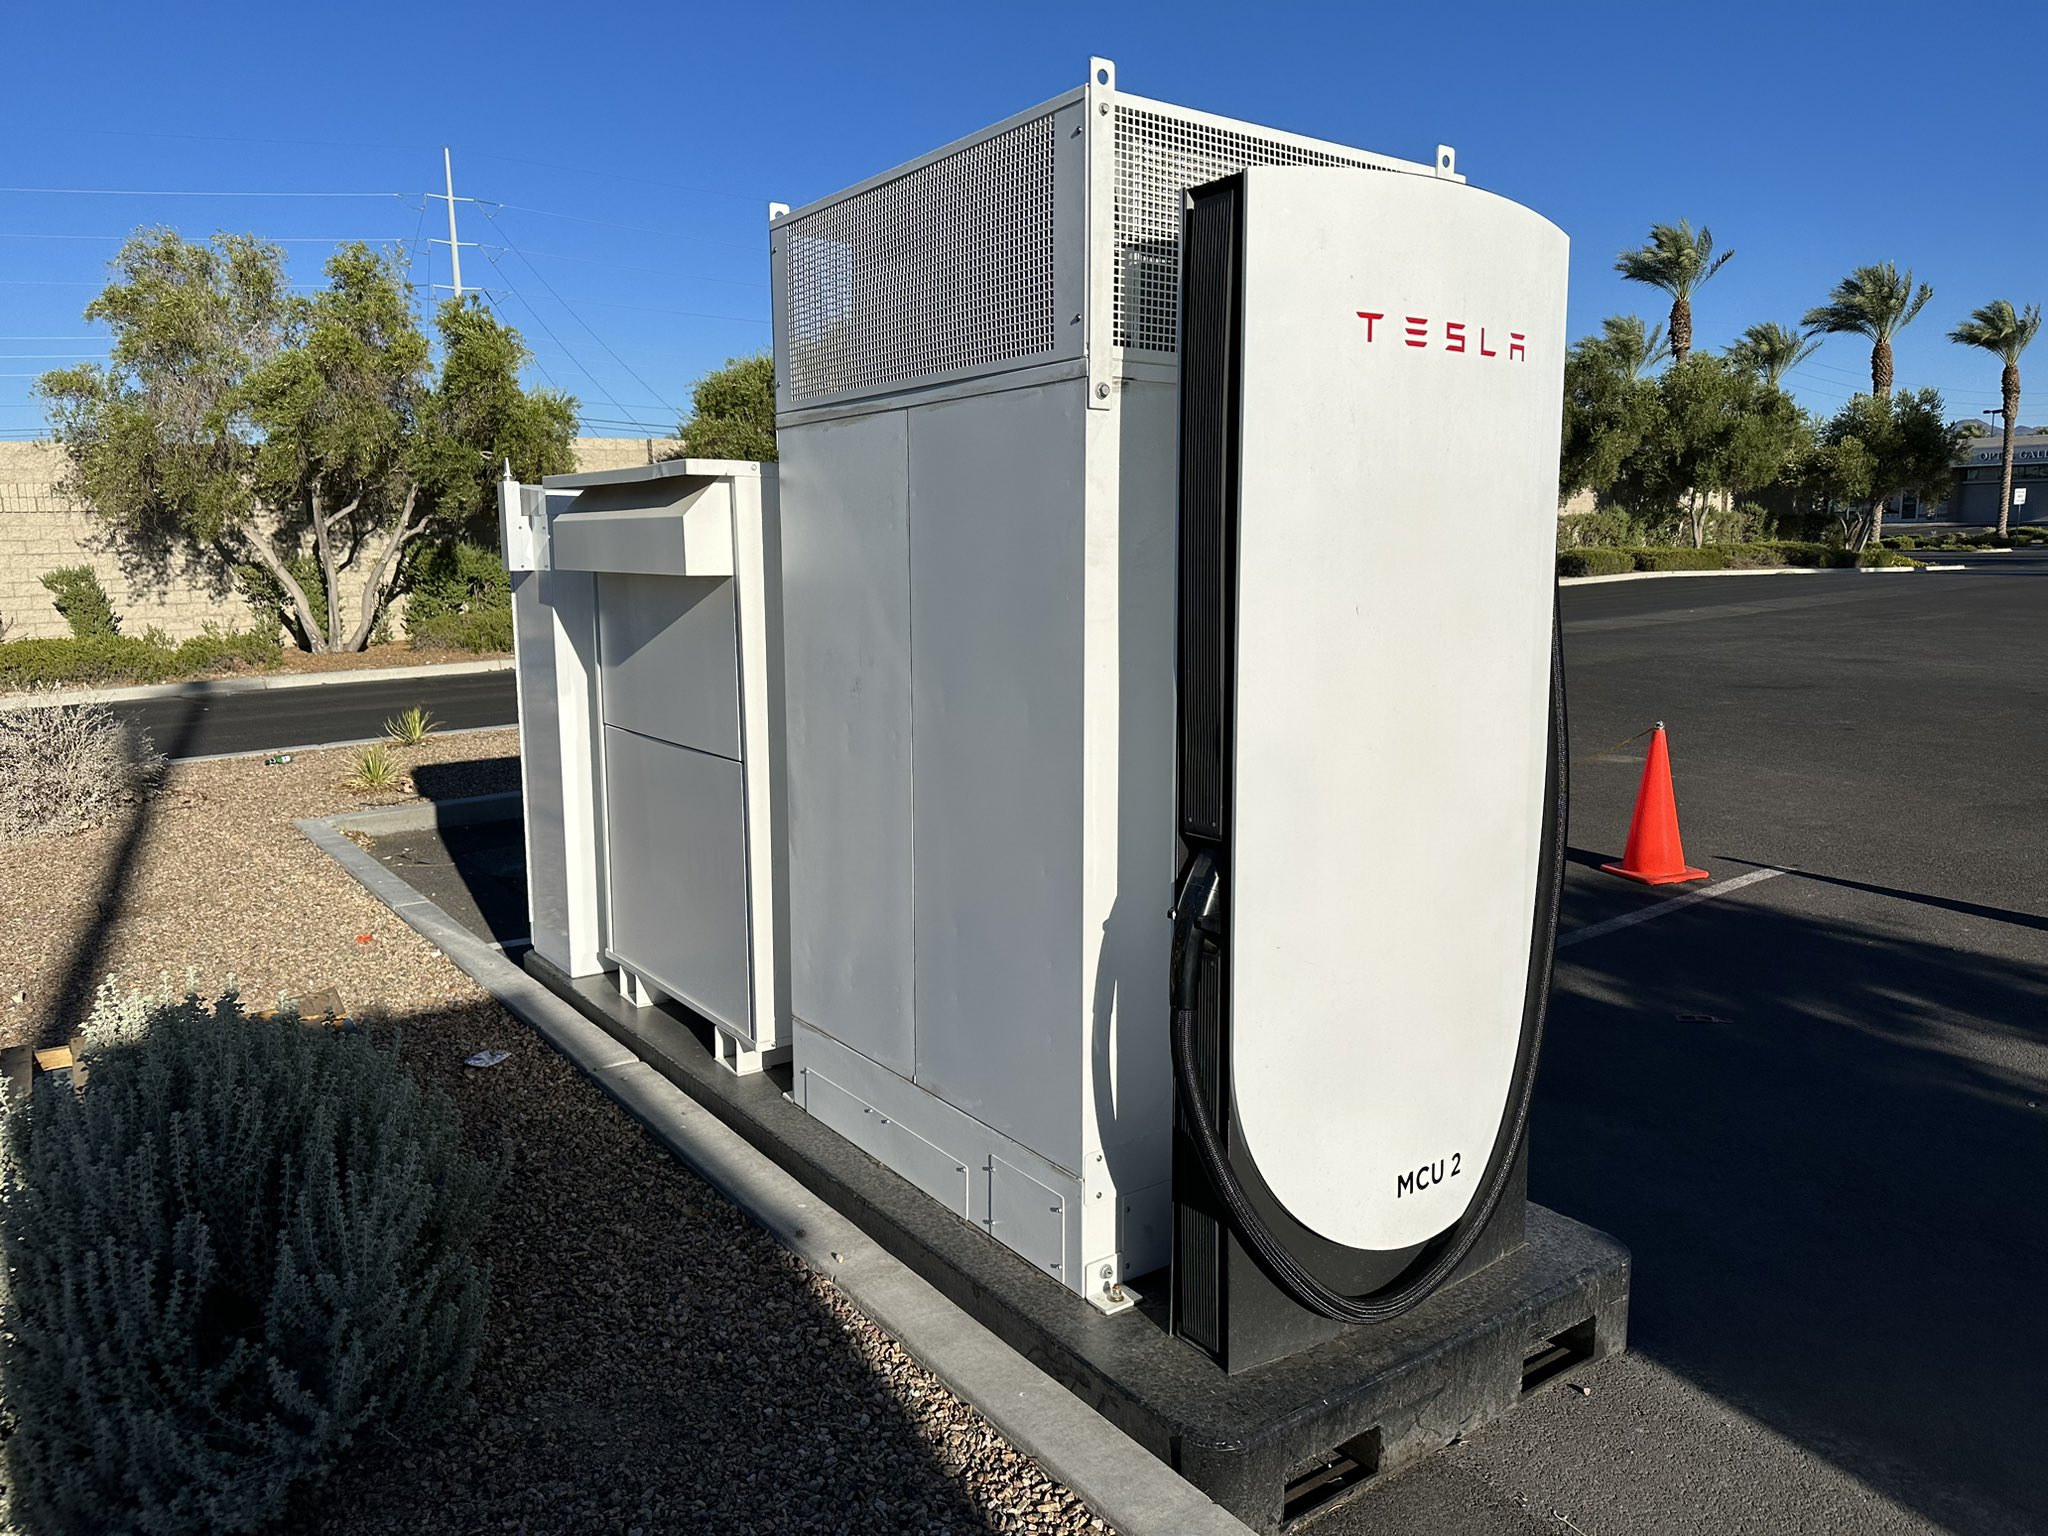 Tesla introduces mobile Megacharger for Semi in Las Vegas